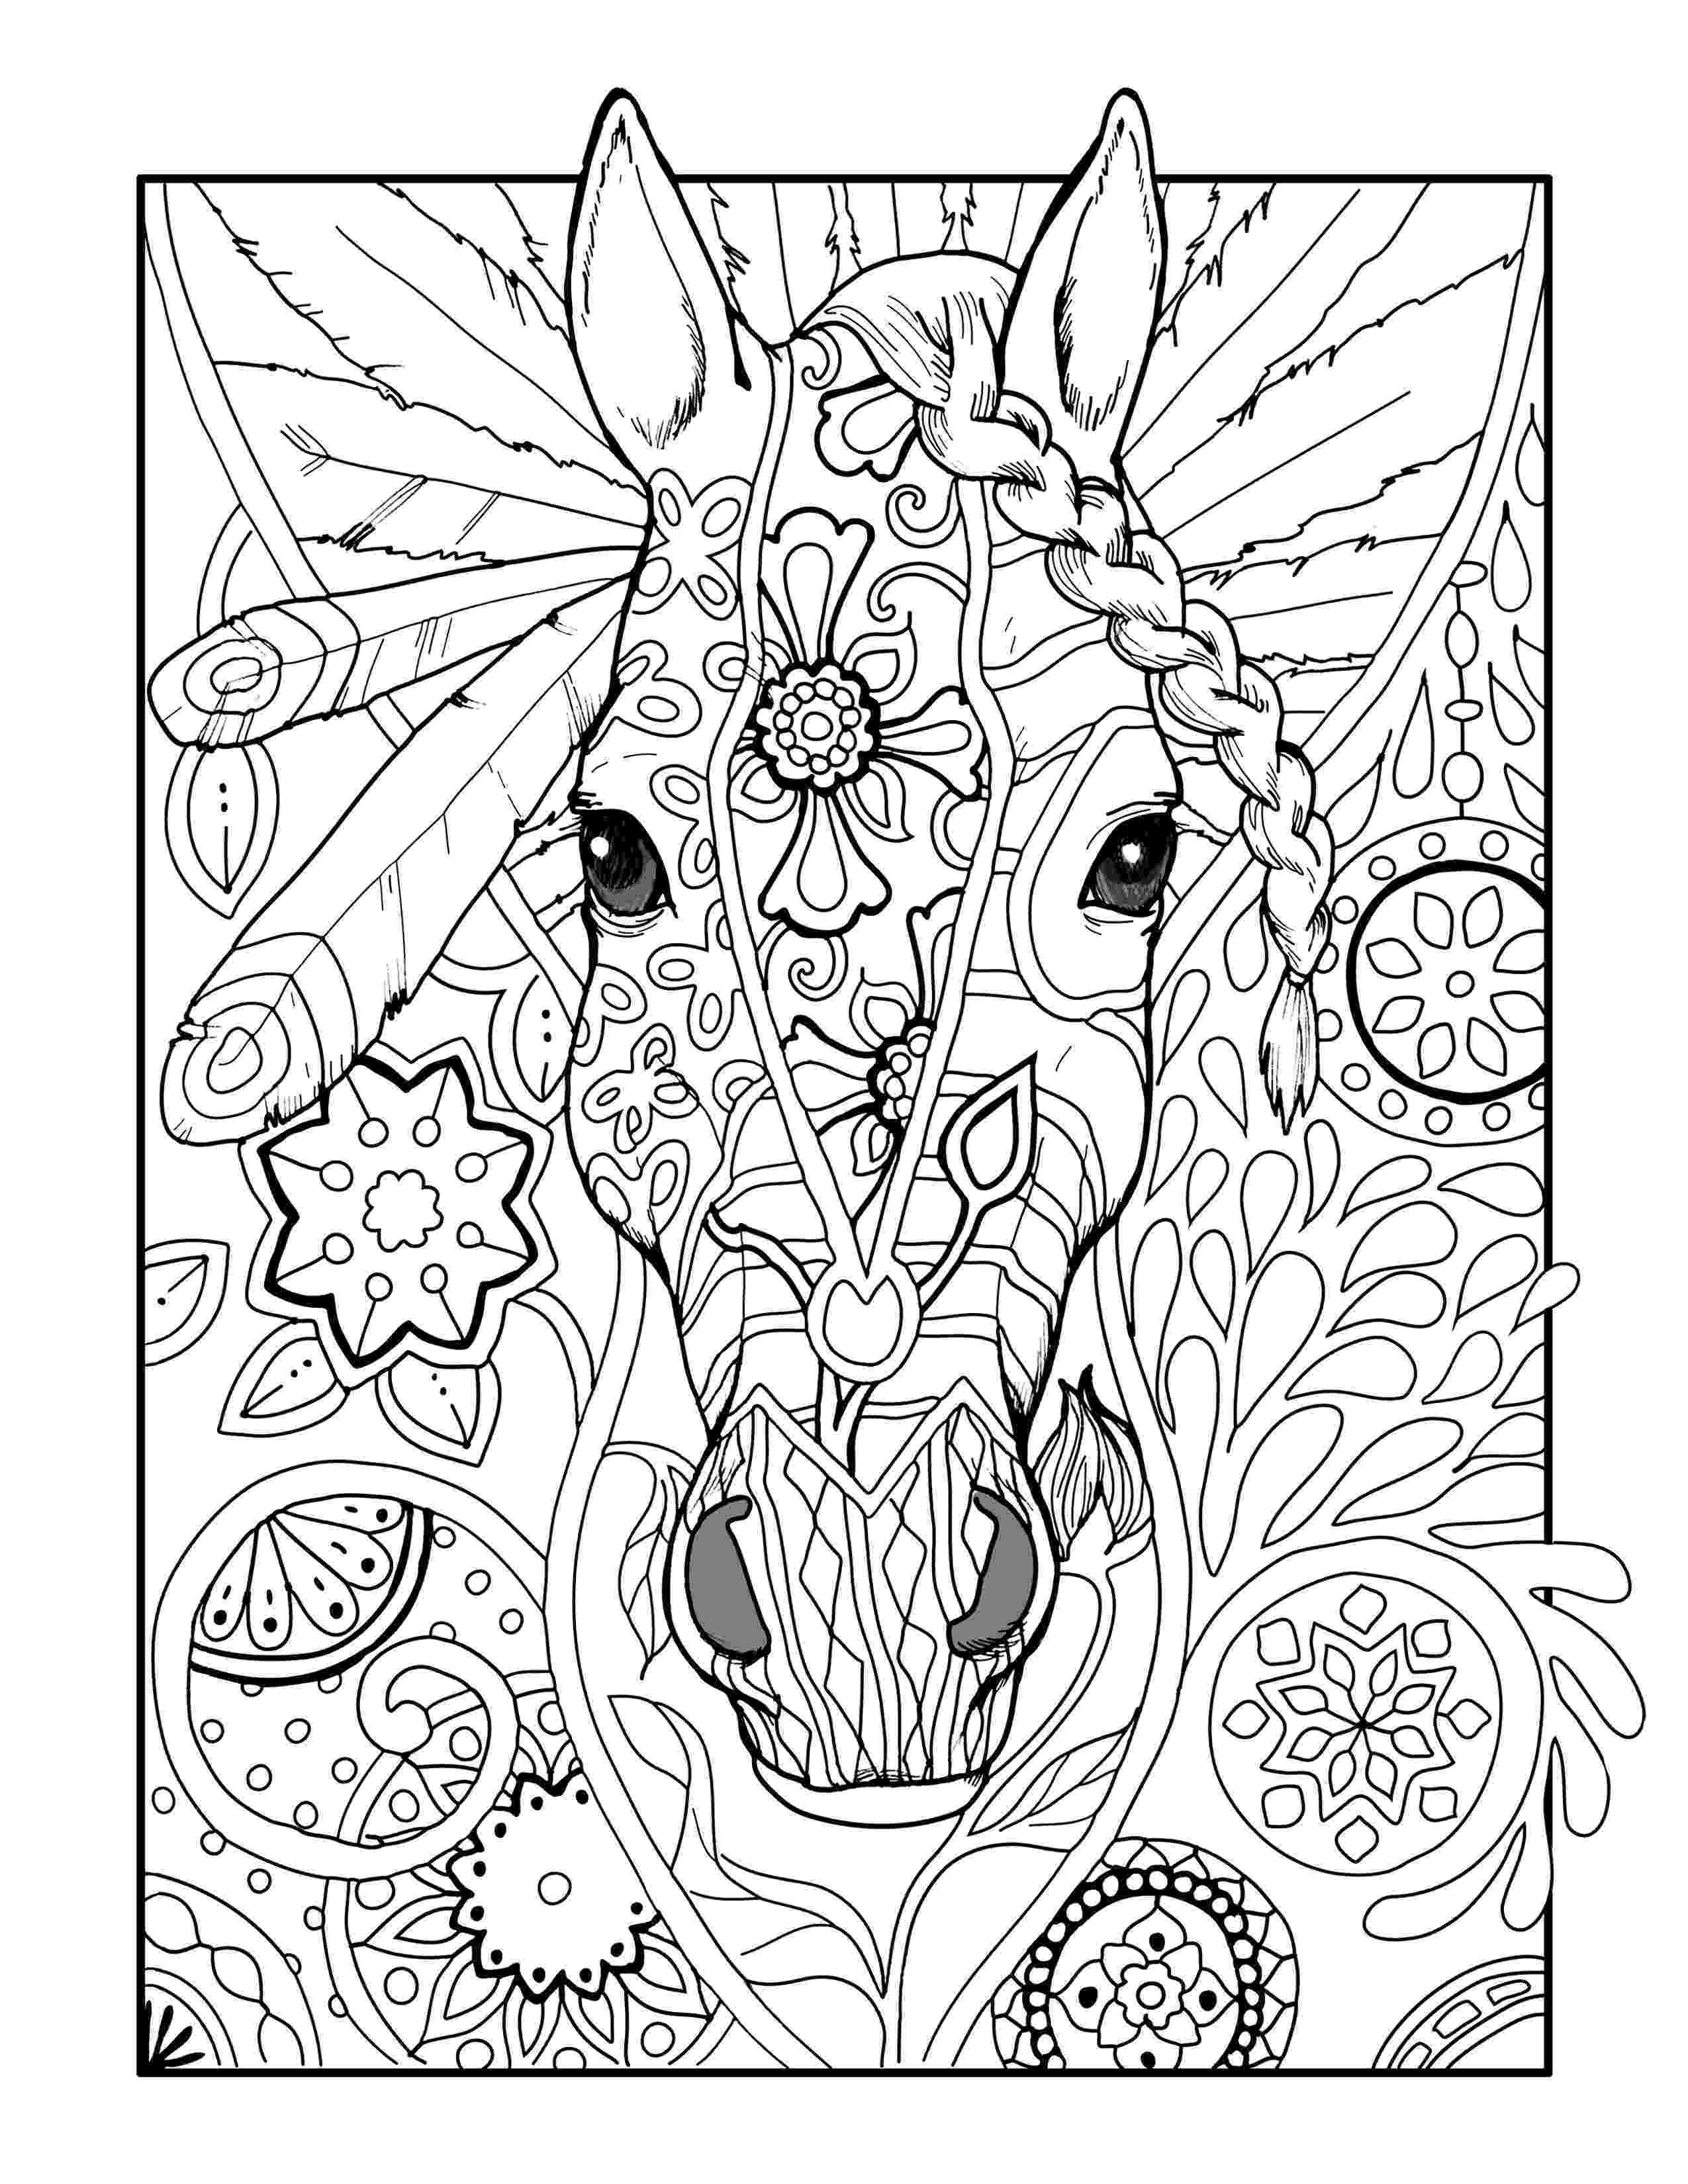 cheetah coloring pages for adults escape to a world of flying creatures unicorns and pages cheetah coloring for adults 